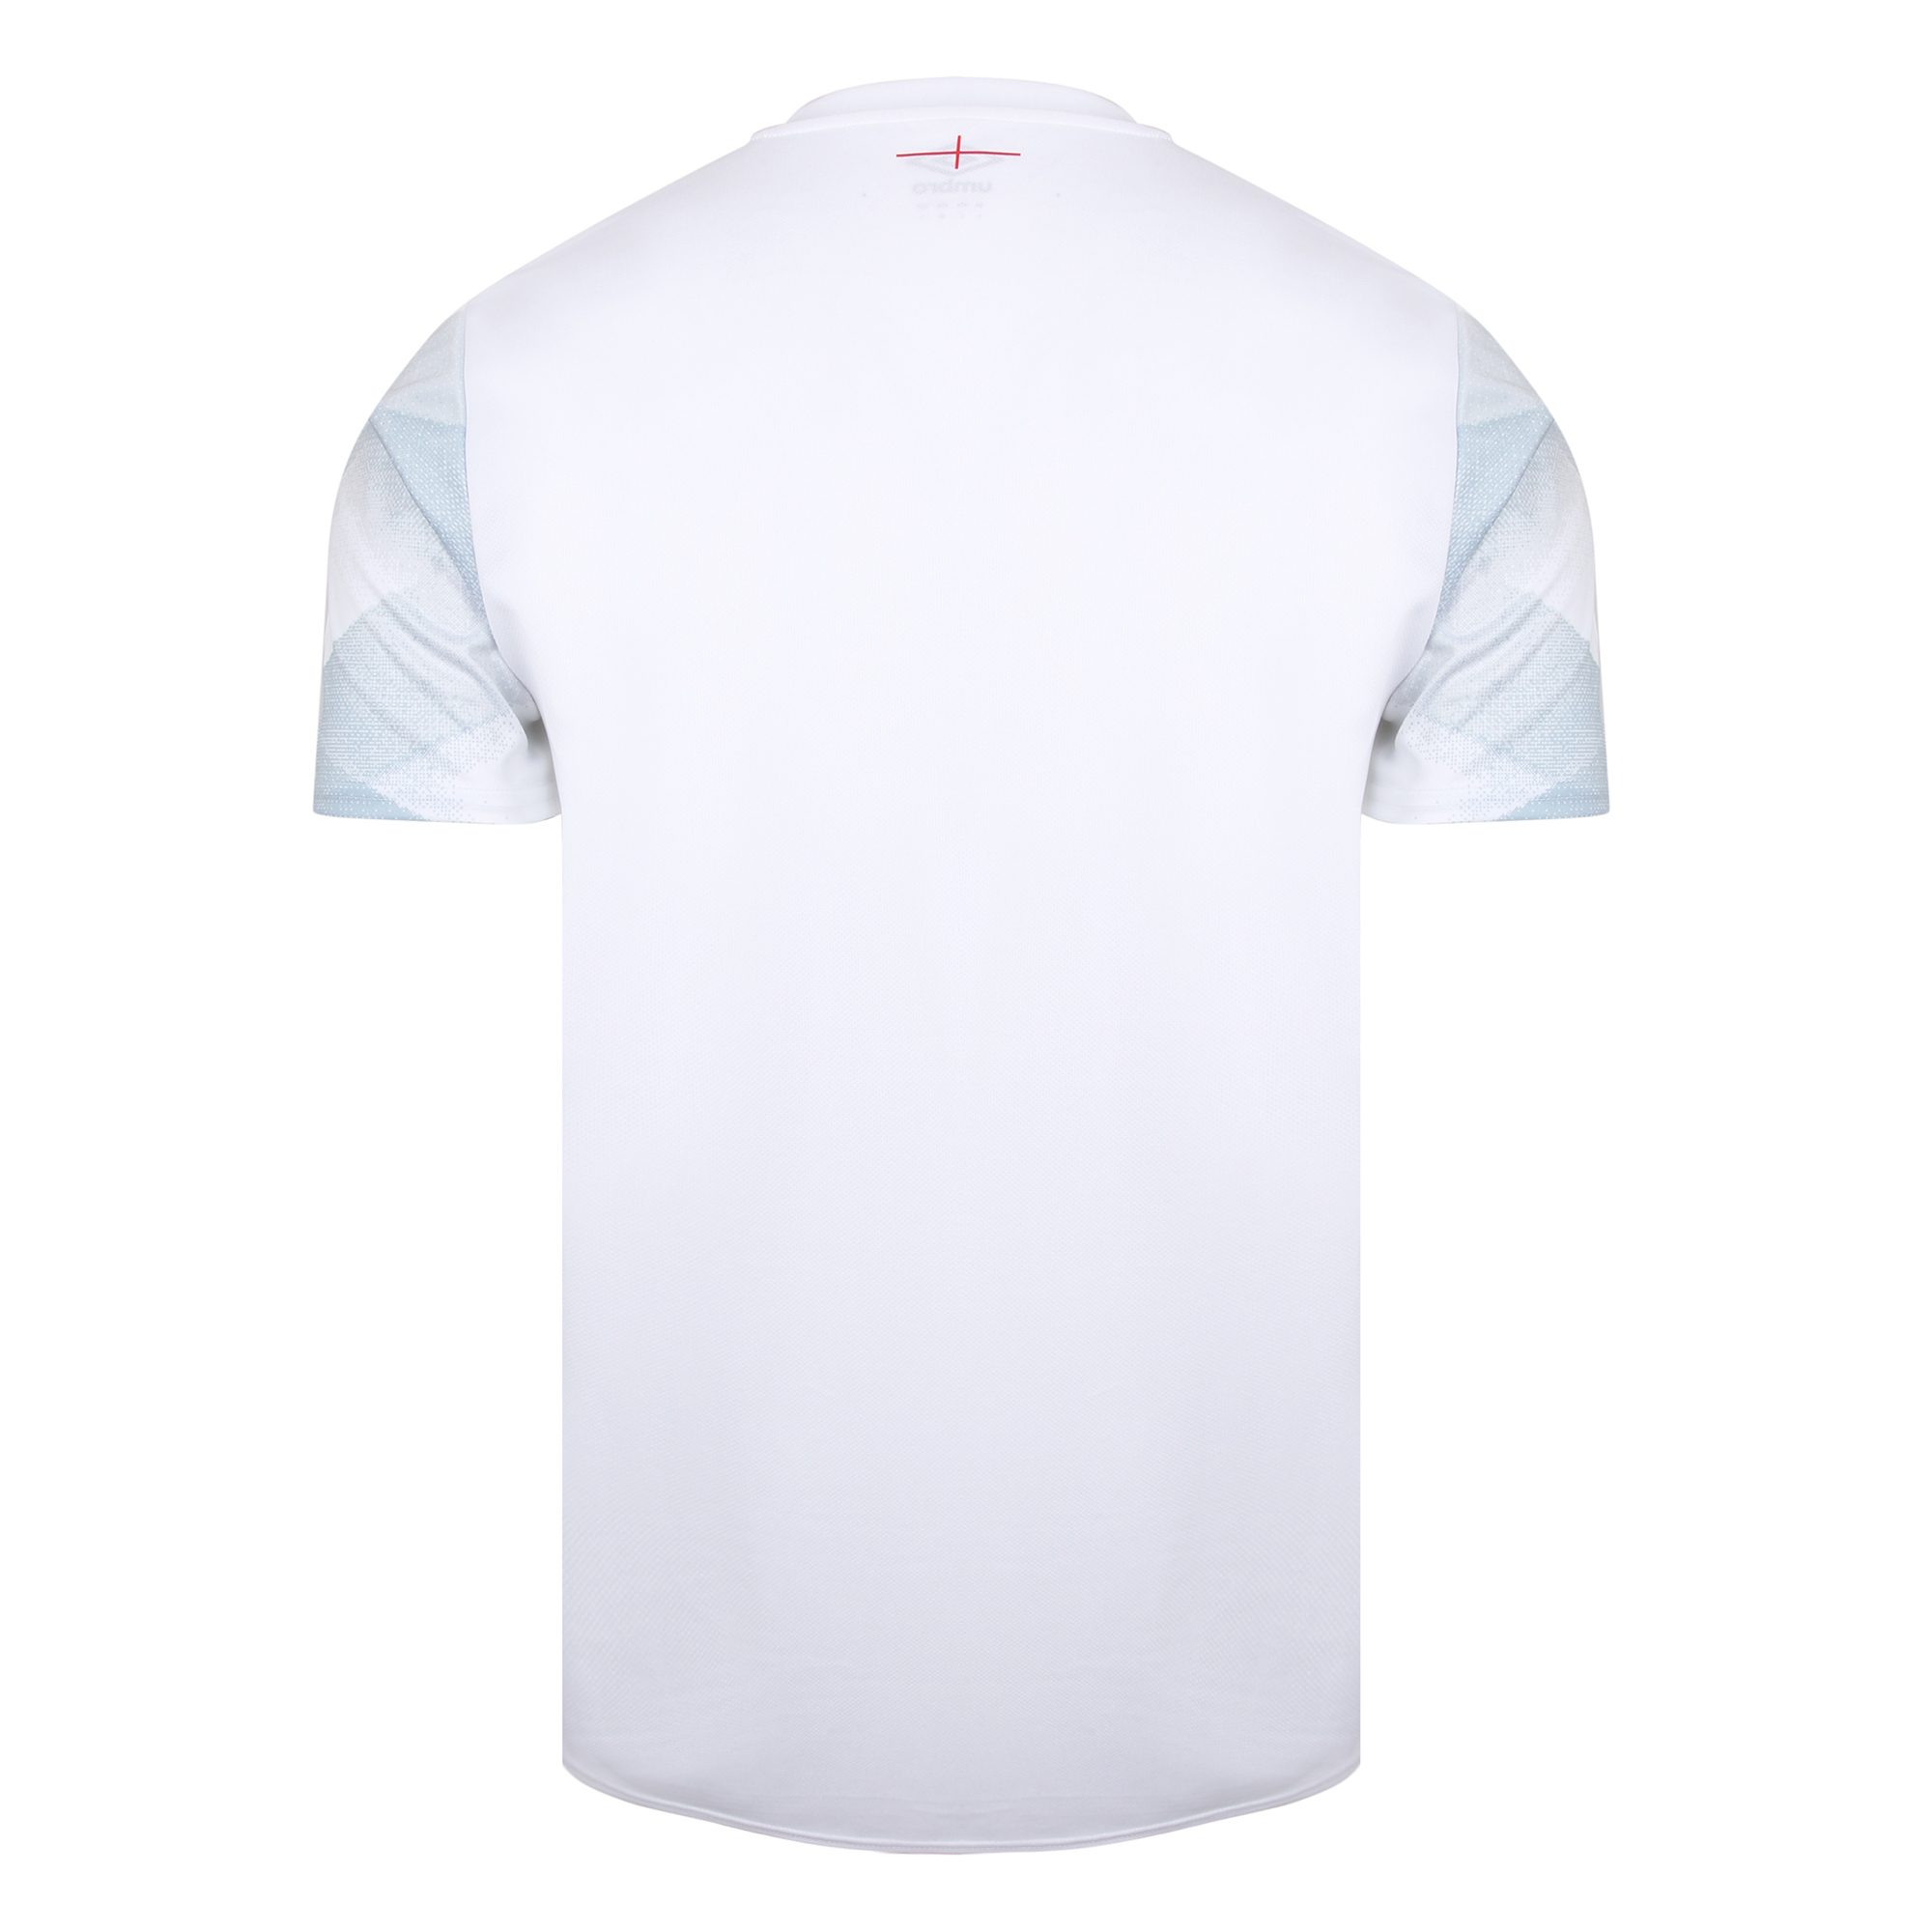 England 21/22 Rugby Warm Up Jersey | The Rugby Shop